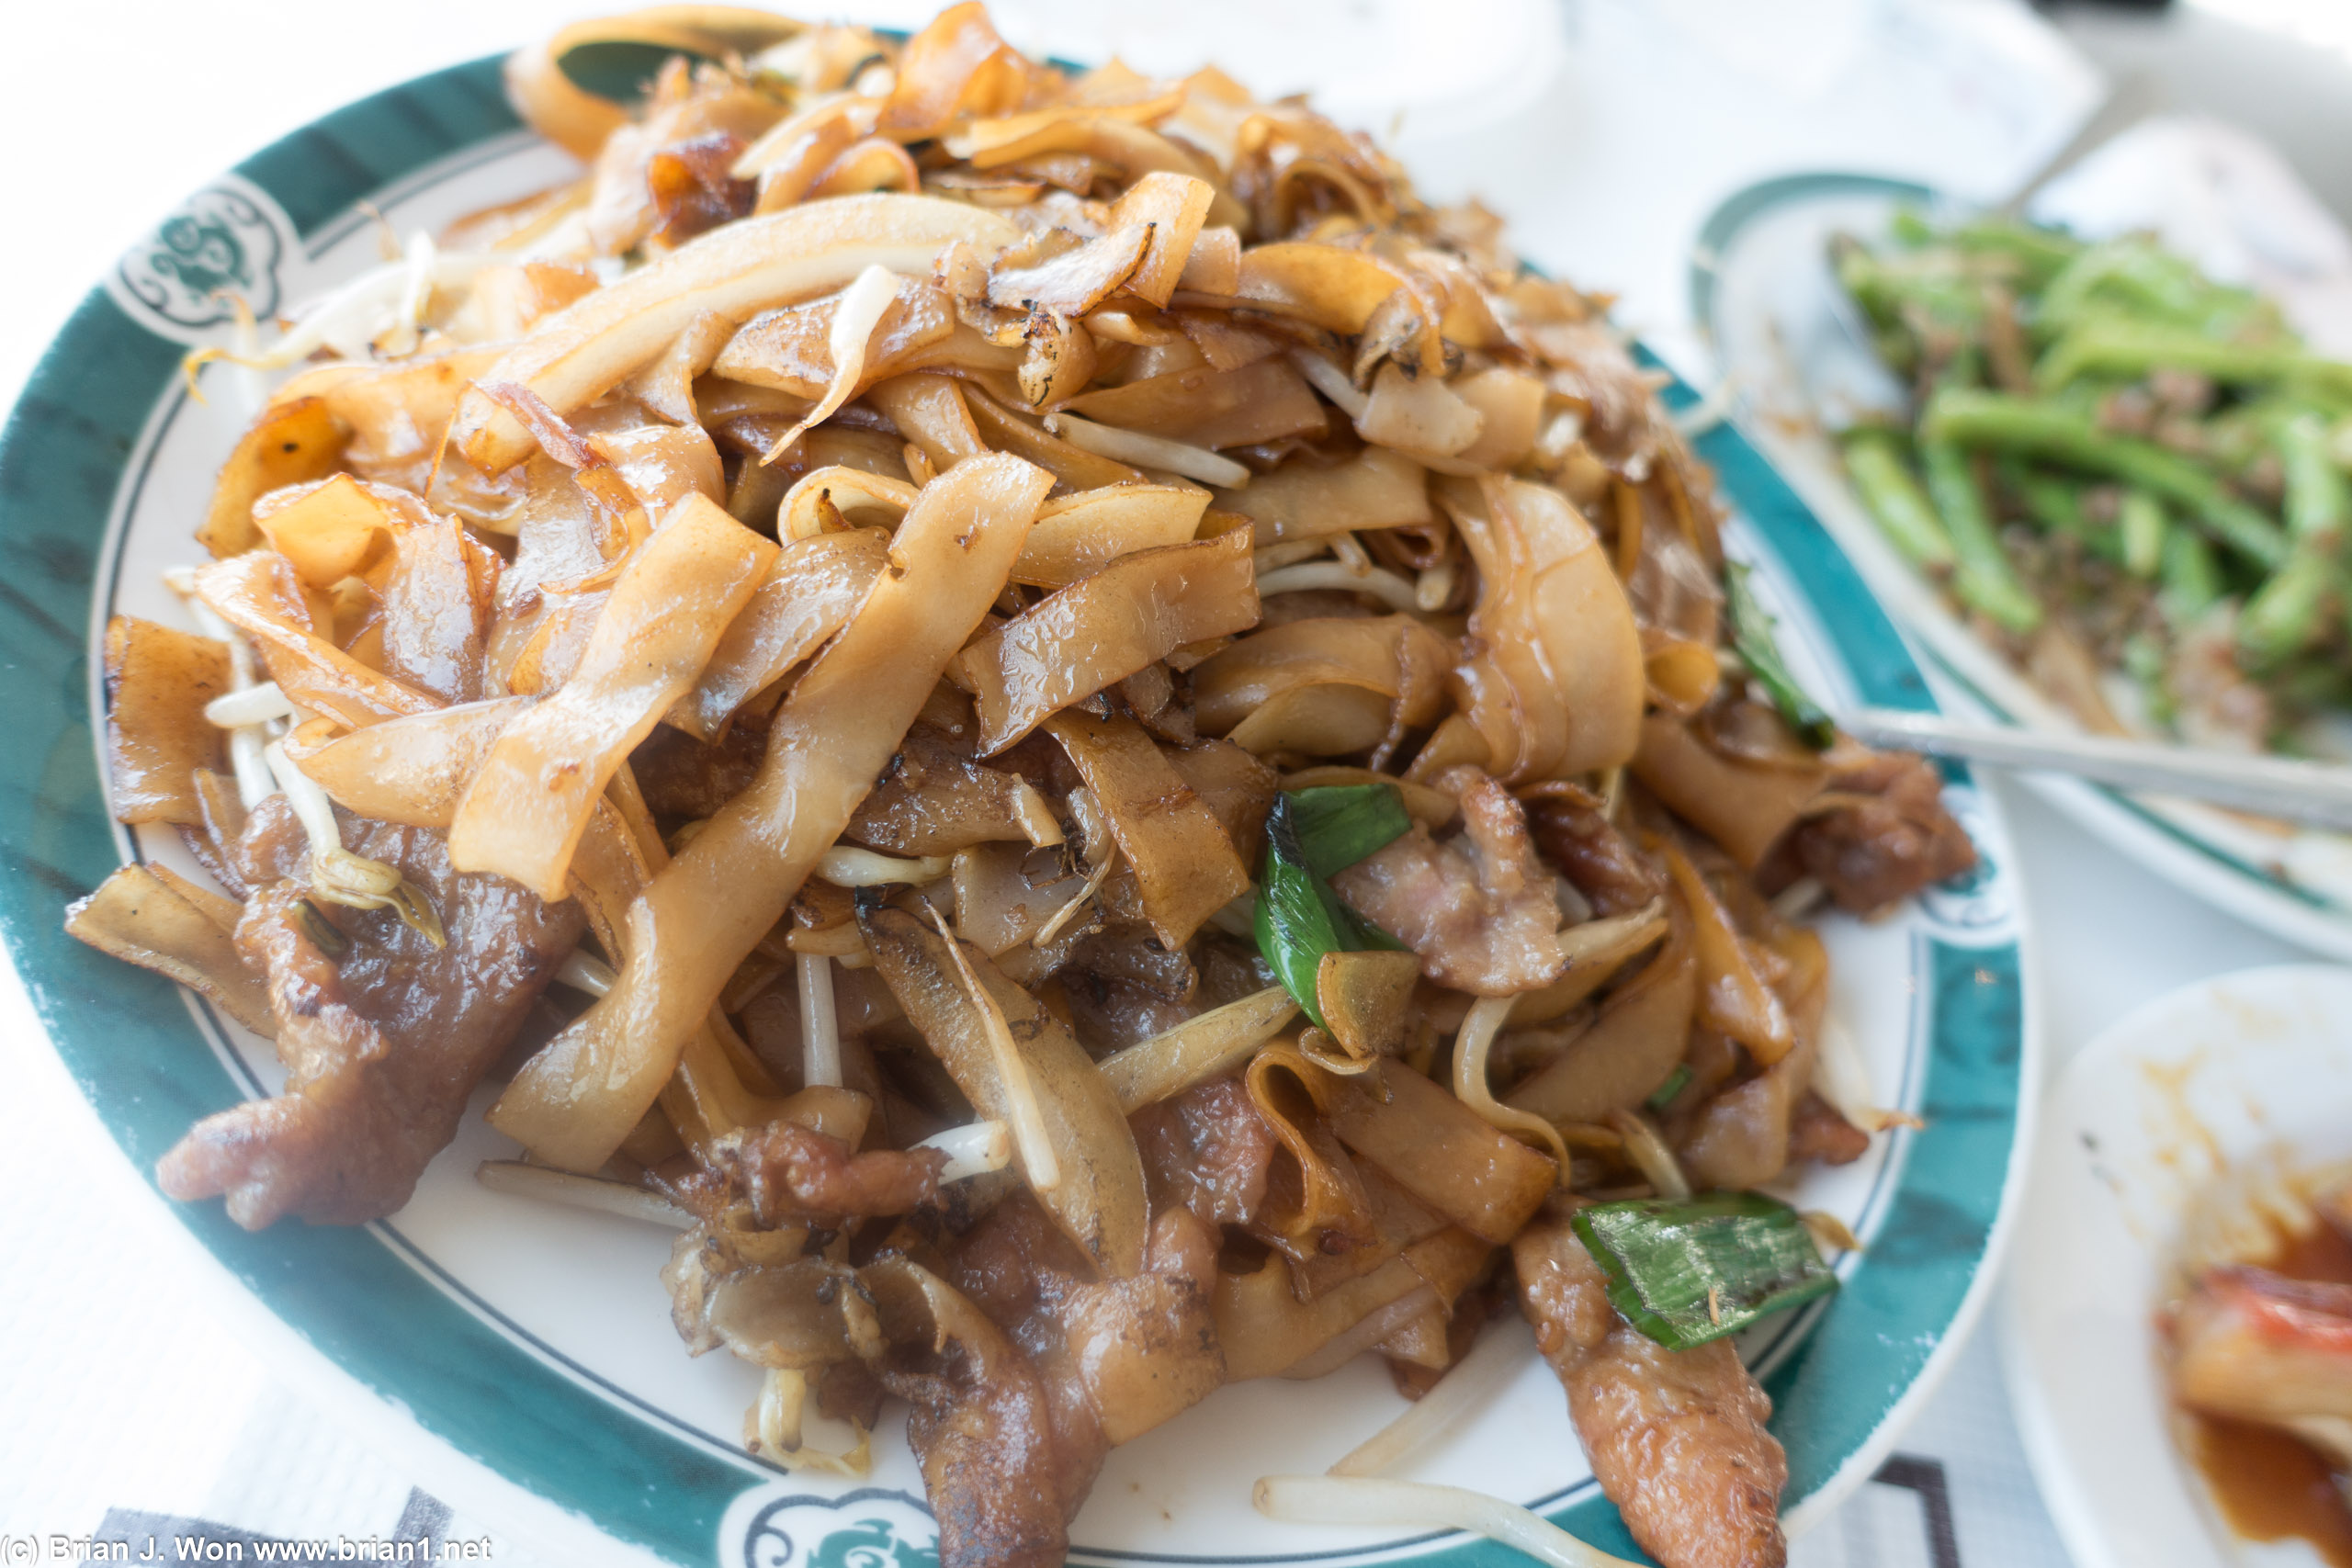 Beef chow fun, not too oily, definitely hit the spot.